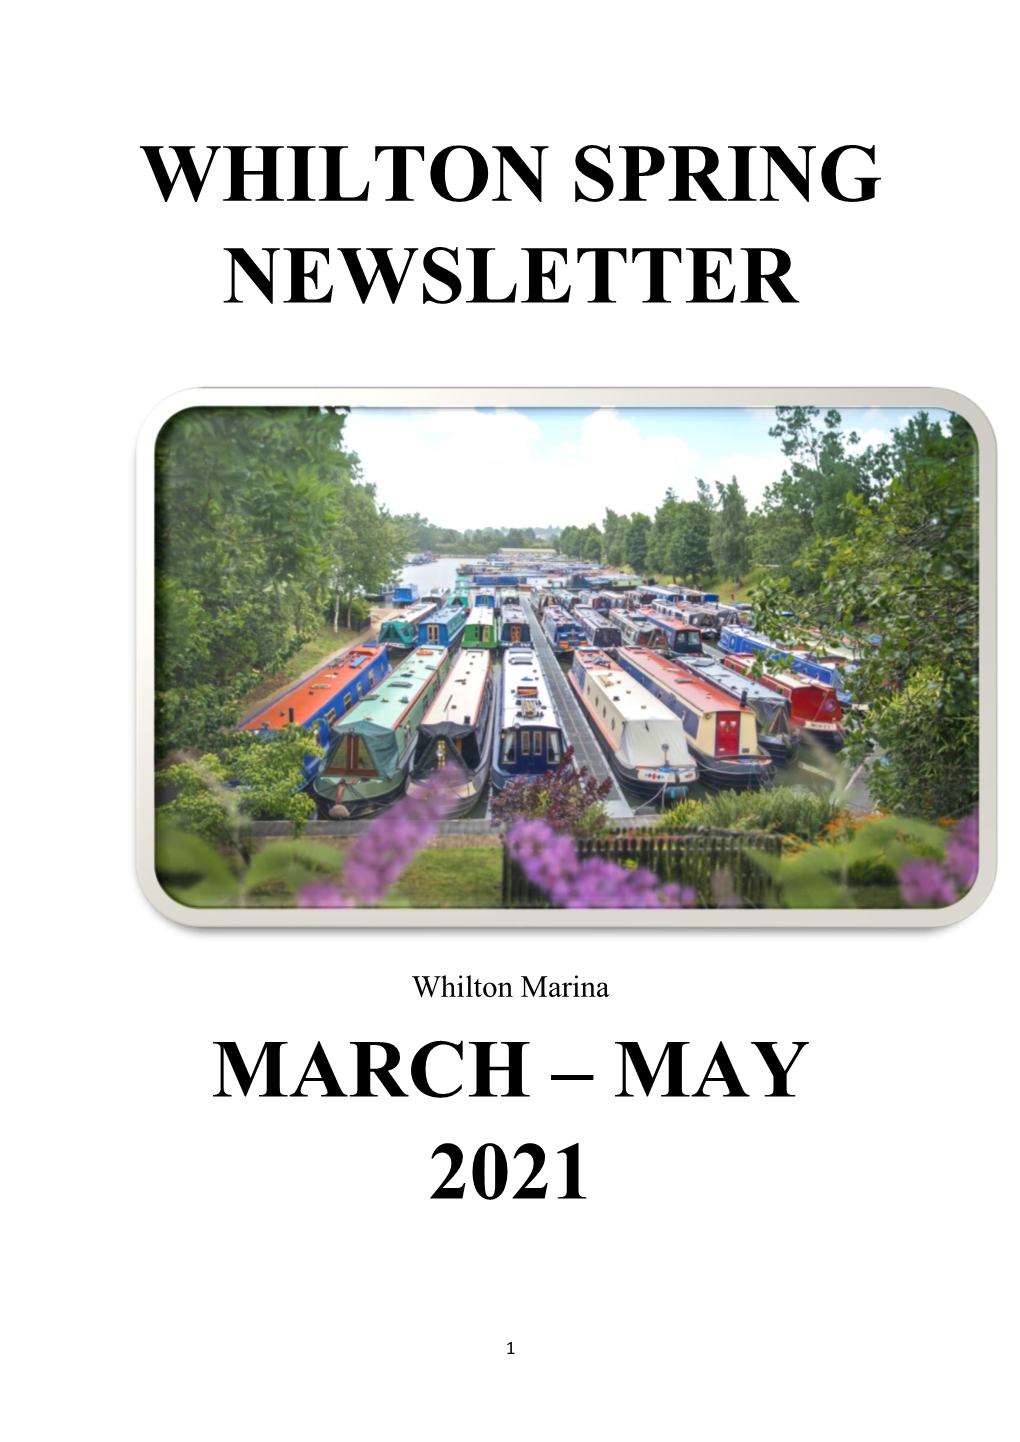 Whilton Spring Newsletter March – May 2021